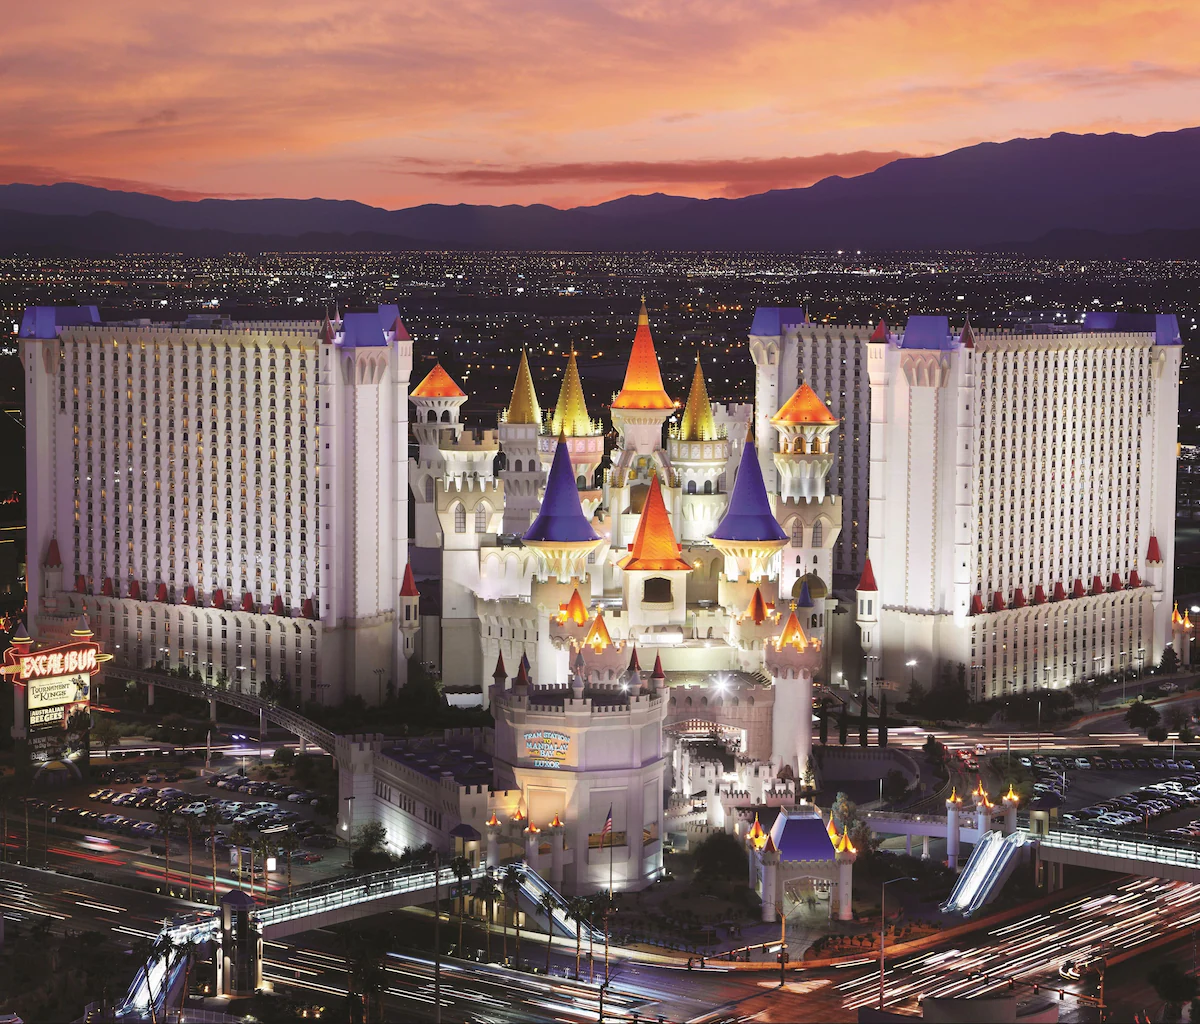 Excalibur Hotel & Casino: Your Ultimate Guide to a Royal Stay in Las Vegas